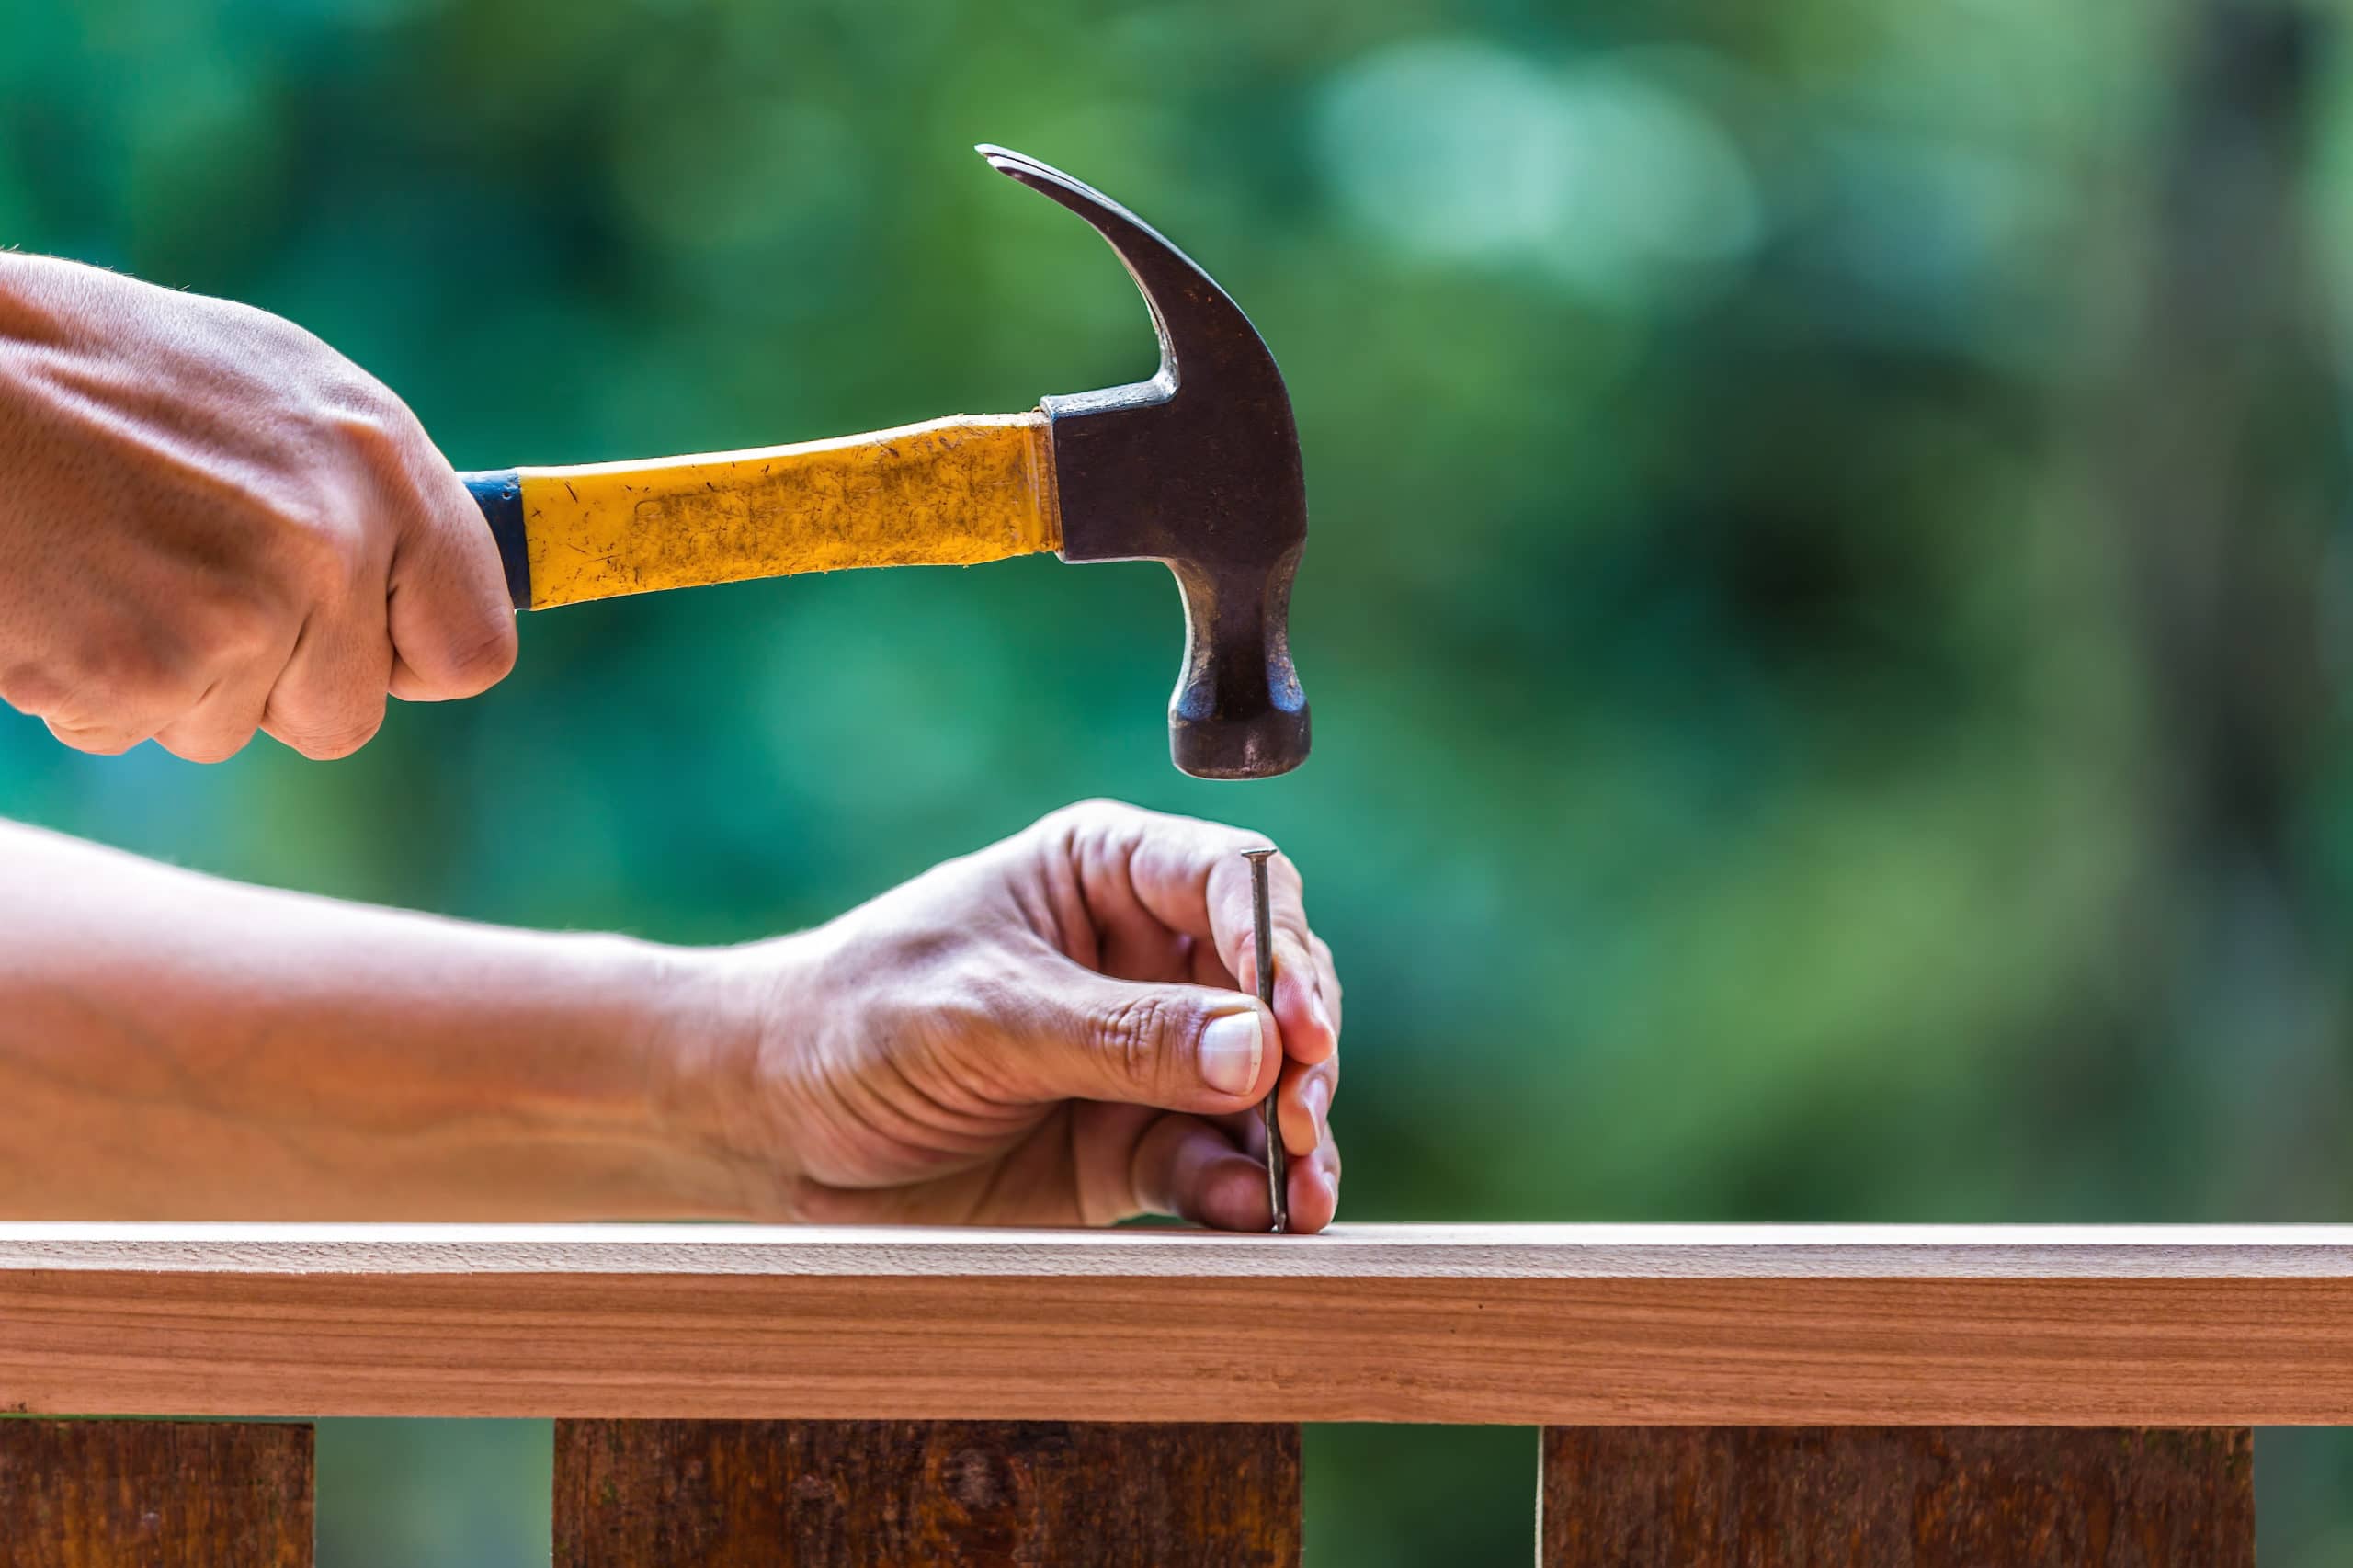 Hammering Nails 101: Tips for Good Technique